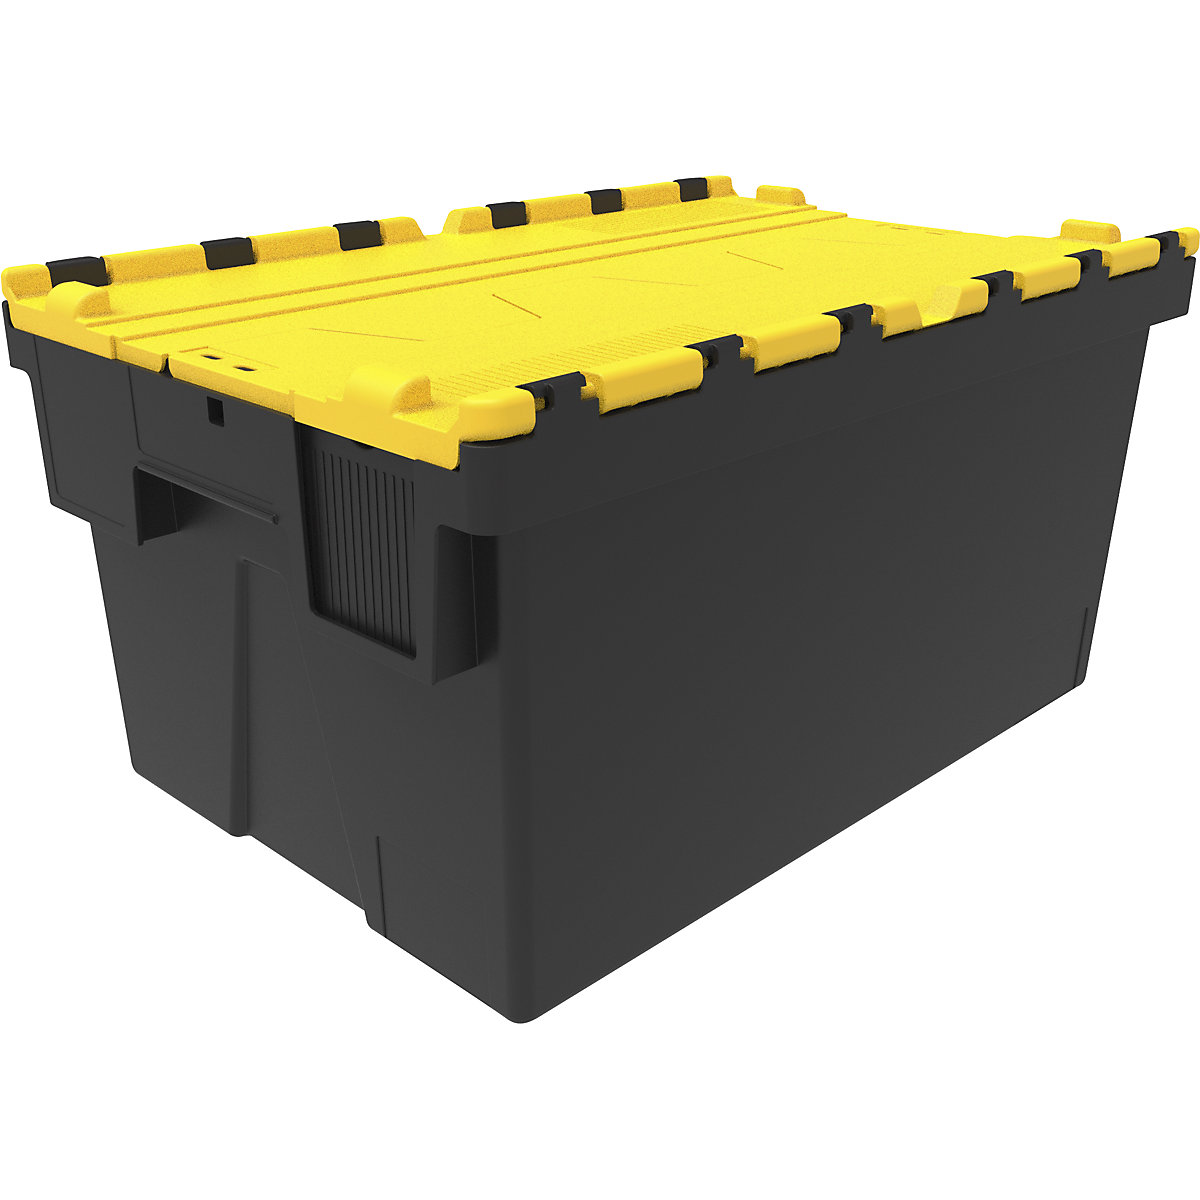 Reusable stacking container, LxWxH 600 x 400 x 310 mm, black/yellow-4